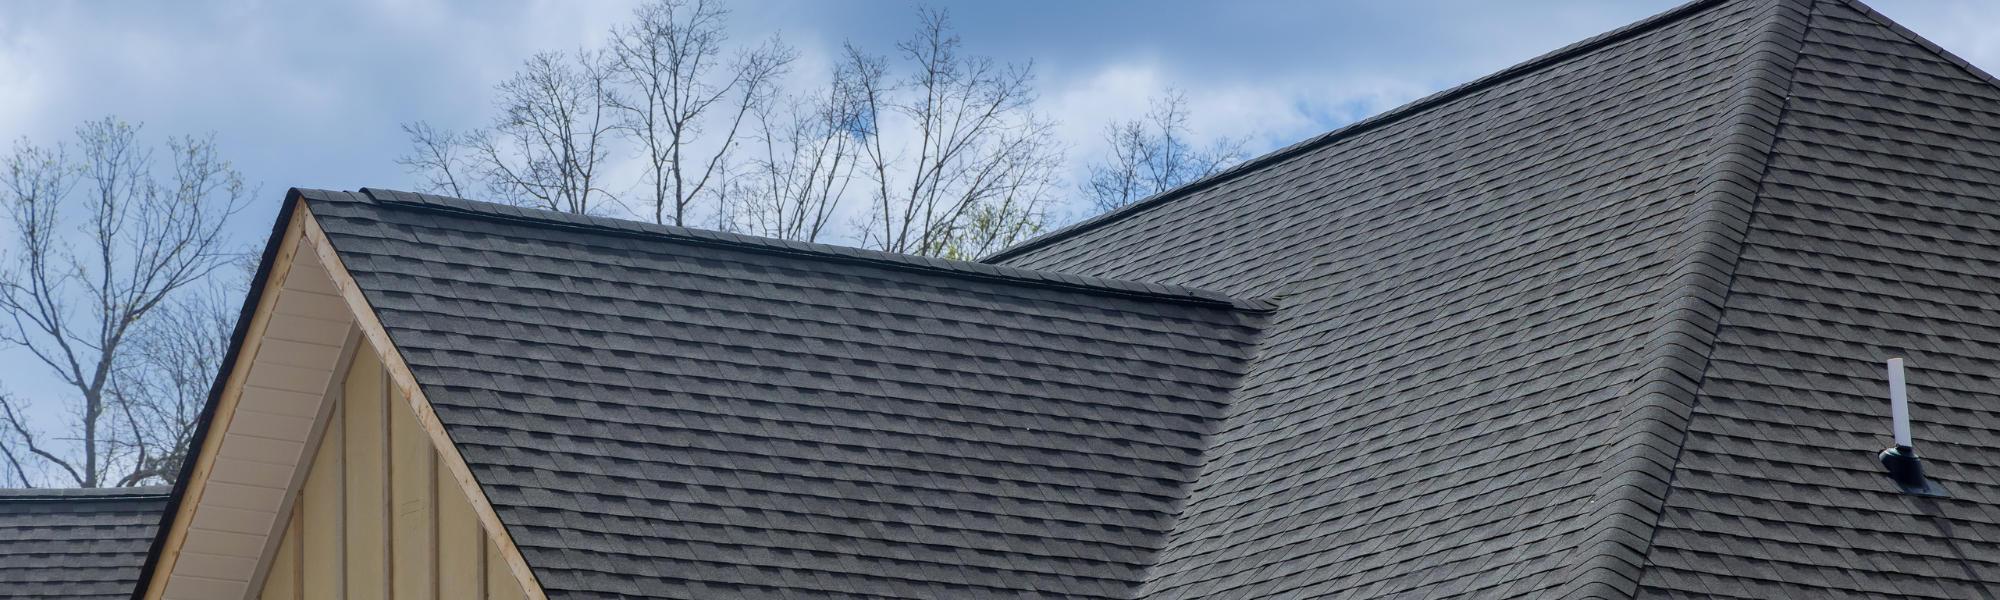 Will Replacing My Roof Help Sell My House